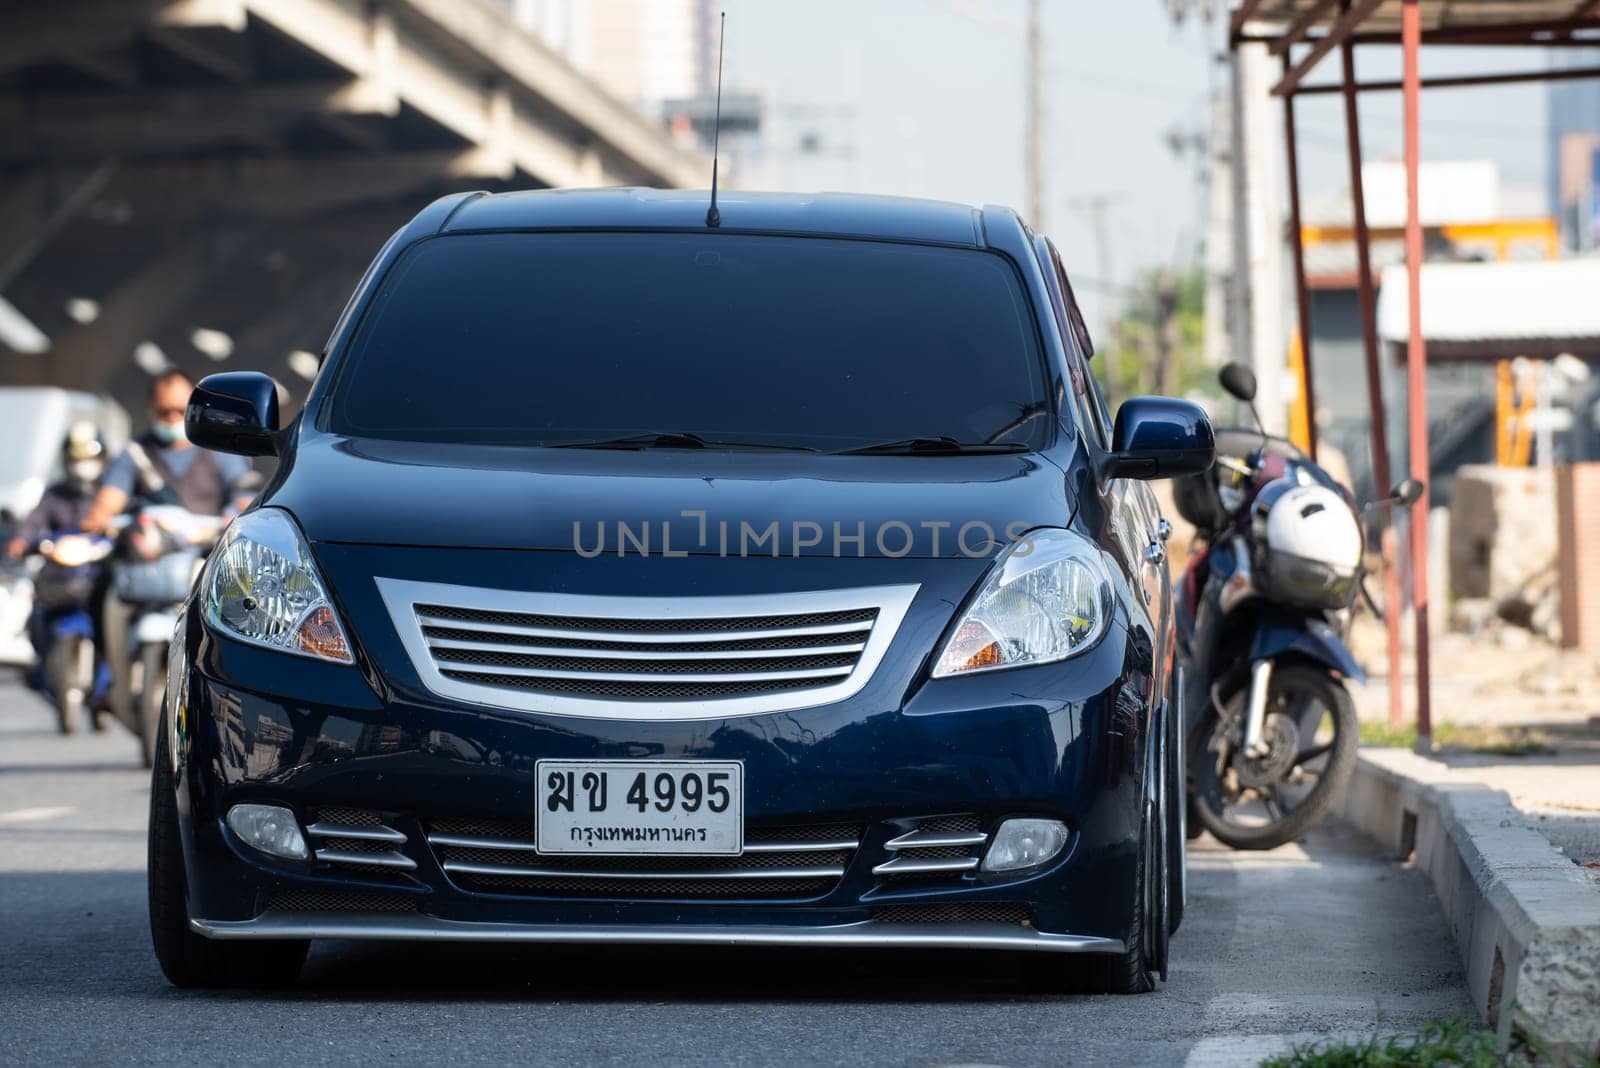 Bangkok, Thailand - November 22, 2022 : Car damaged crash from car accident on the road wait insurance in a city collision in Bangkok Road, accidents are a major problem of traffic in Thailand.